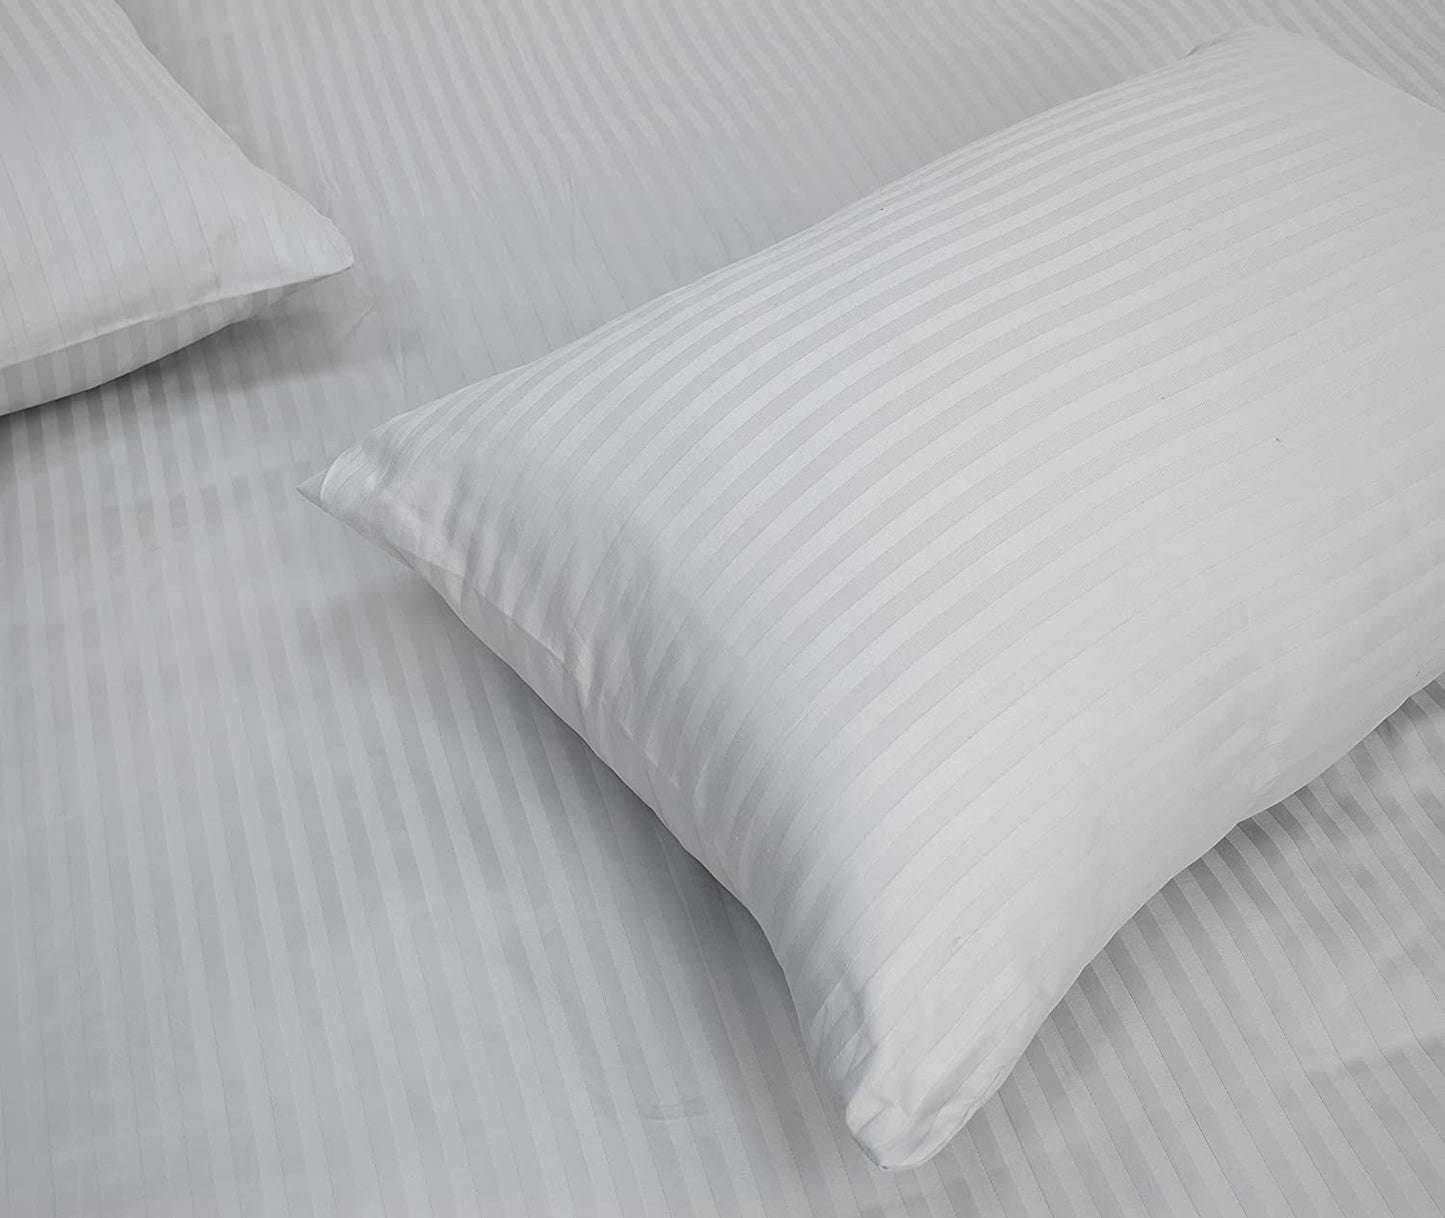 Deep Sleep 1Piece Hotel Quality Cotton Pillow 300TC 50x70cm, White, Down Alternative Bed Pillows with Natural Cotton Cover, Cooling Pillows for Side and Back Sleepers, Soft and Breathable